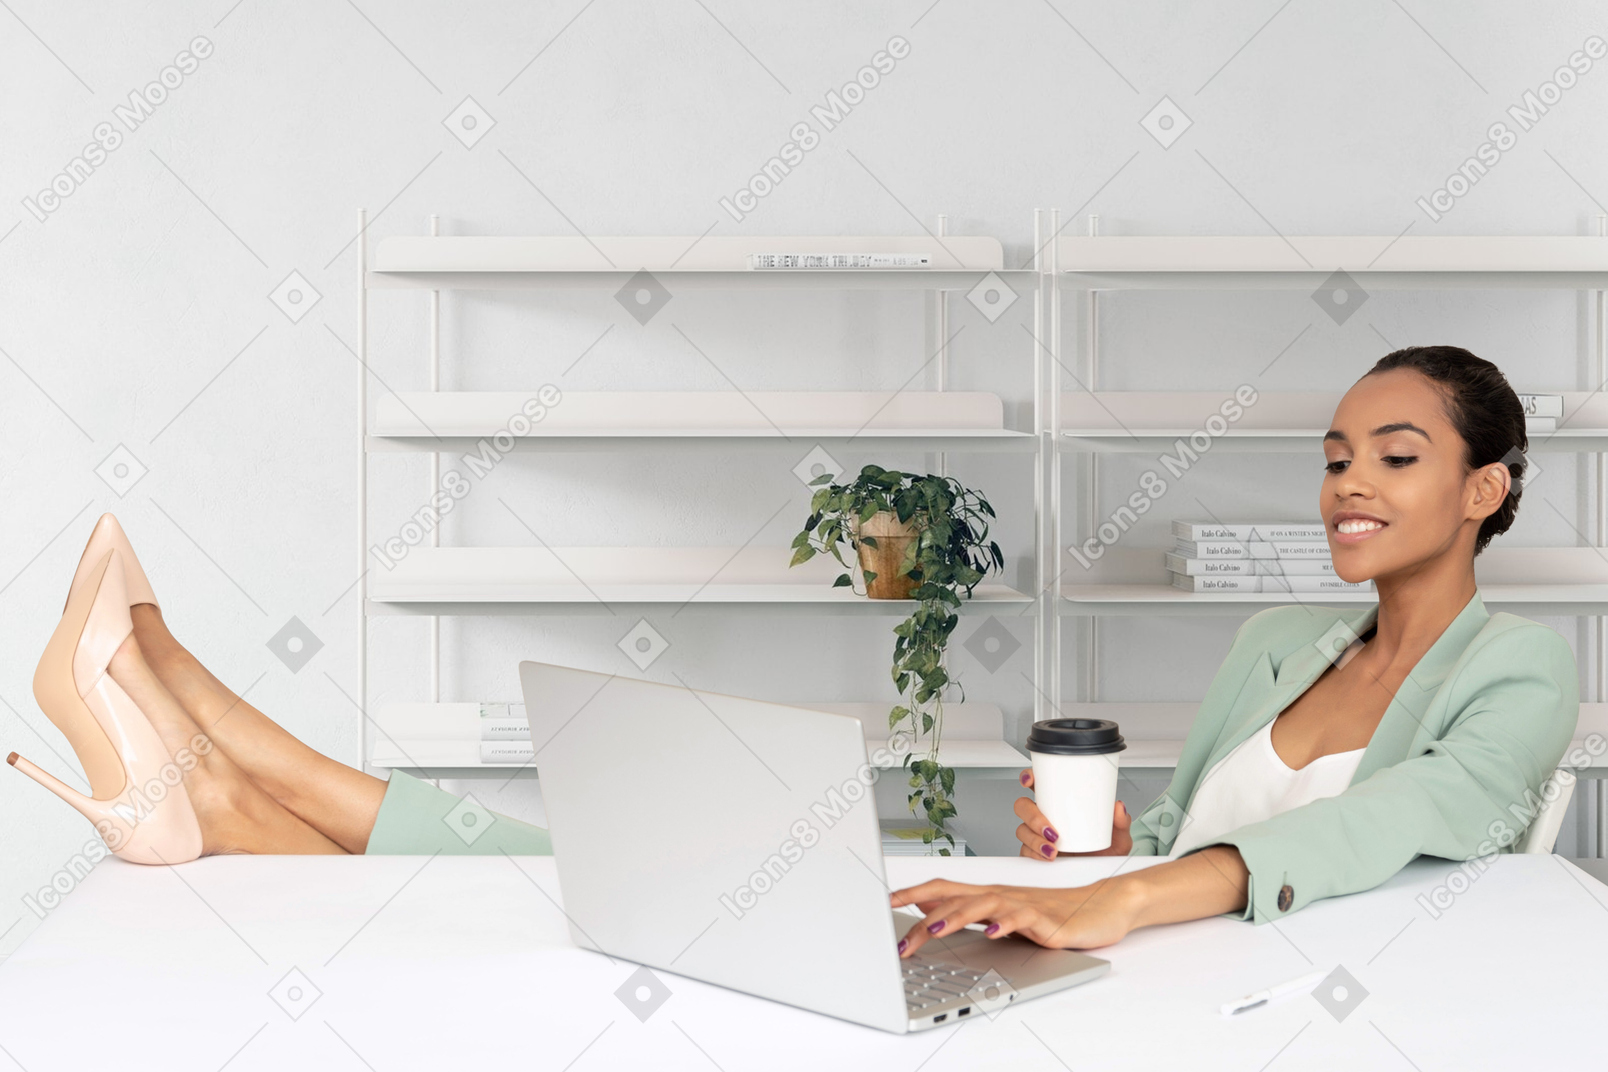 A woman sitting at a desk with a laptop